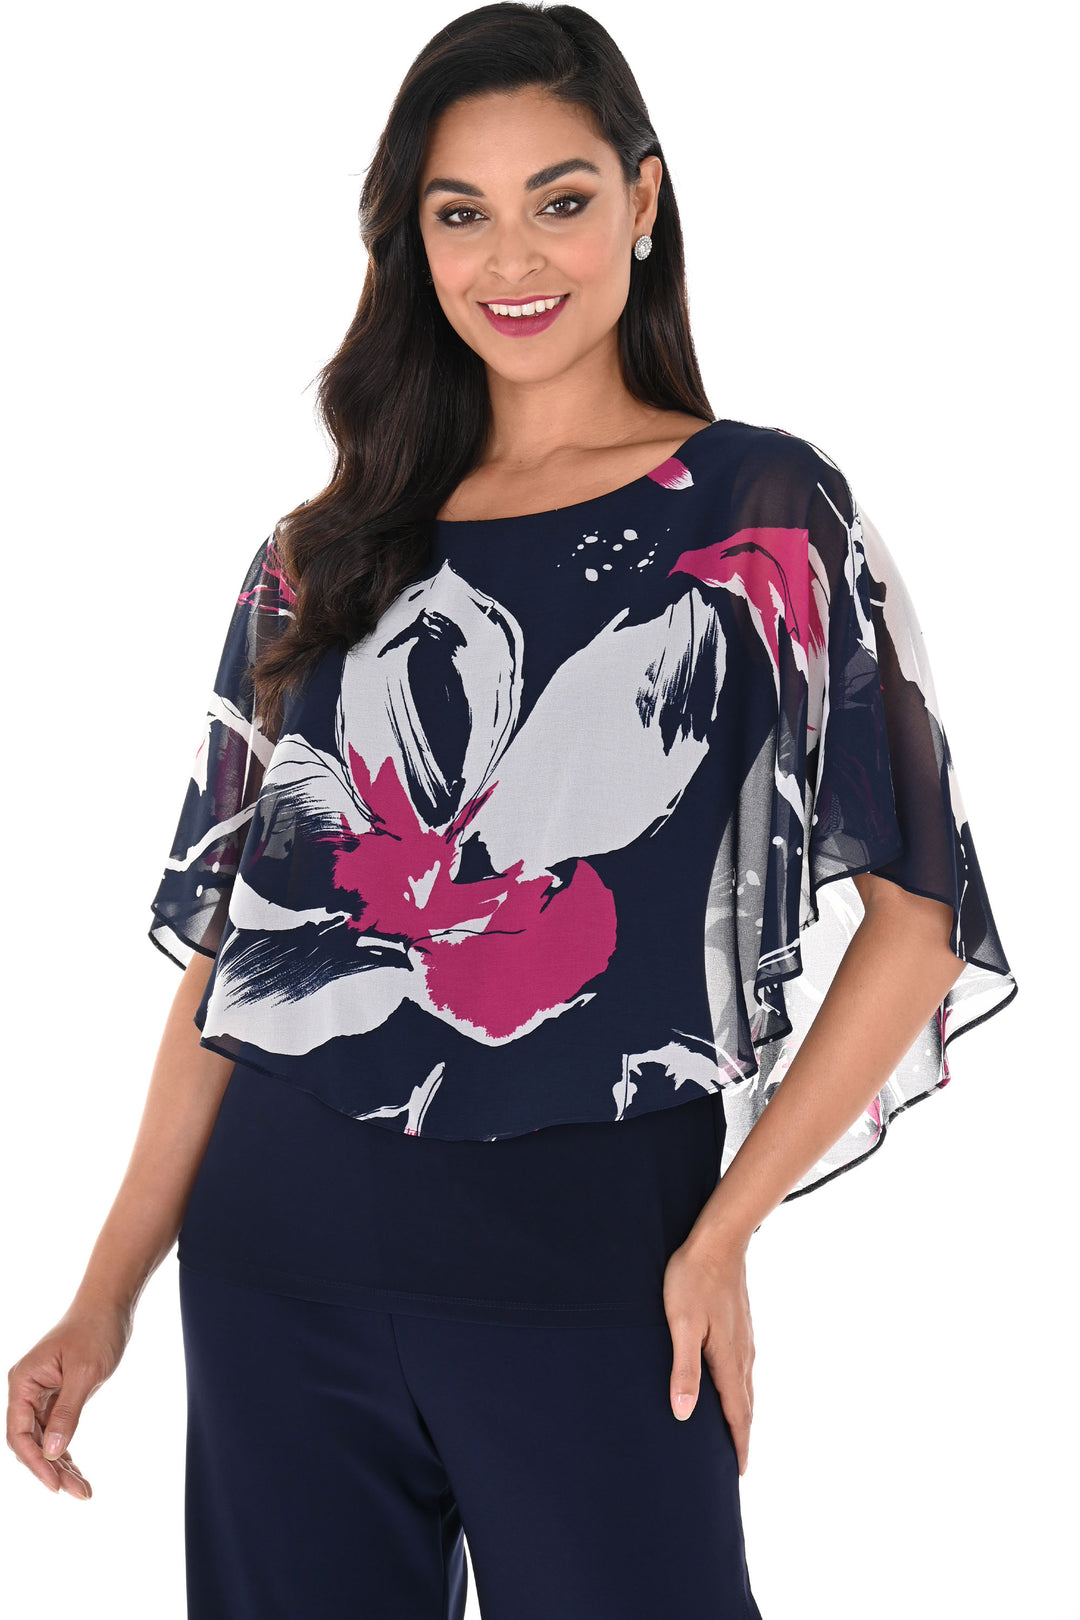 FLORAL CHIFFON OVERLAY TOP